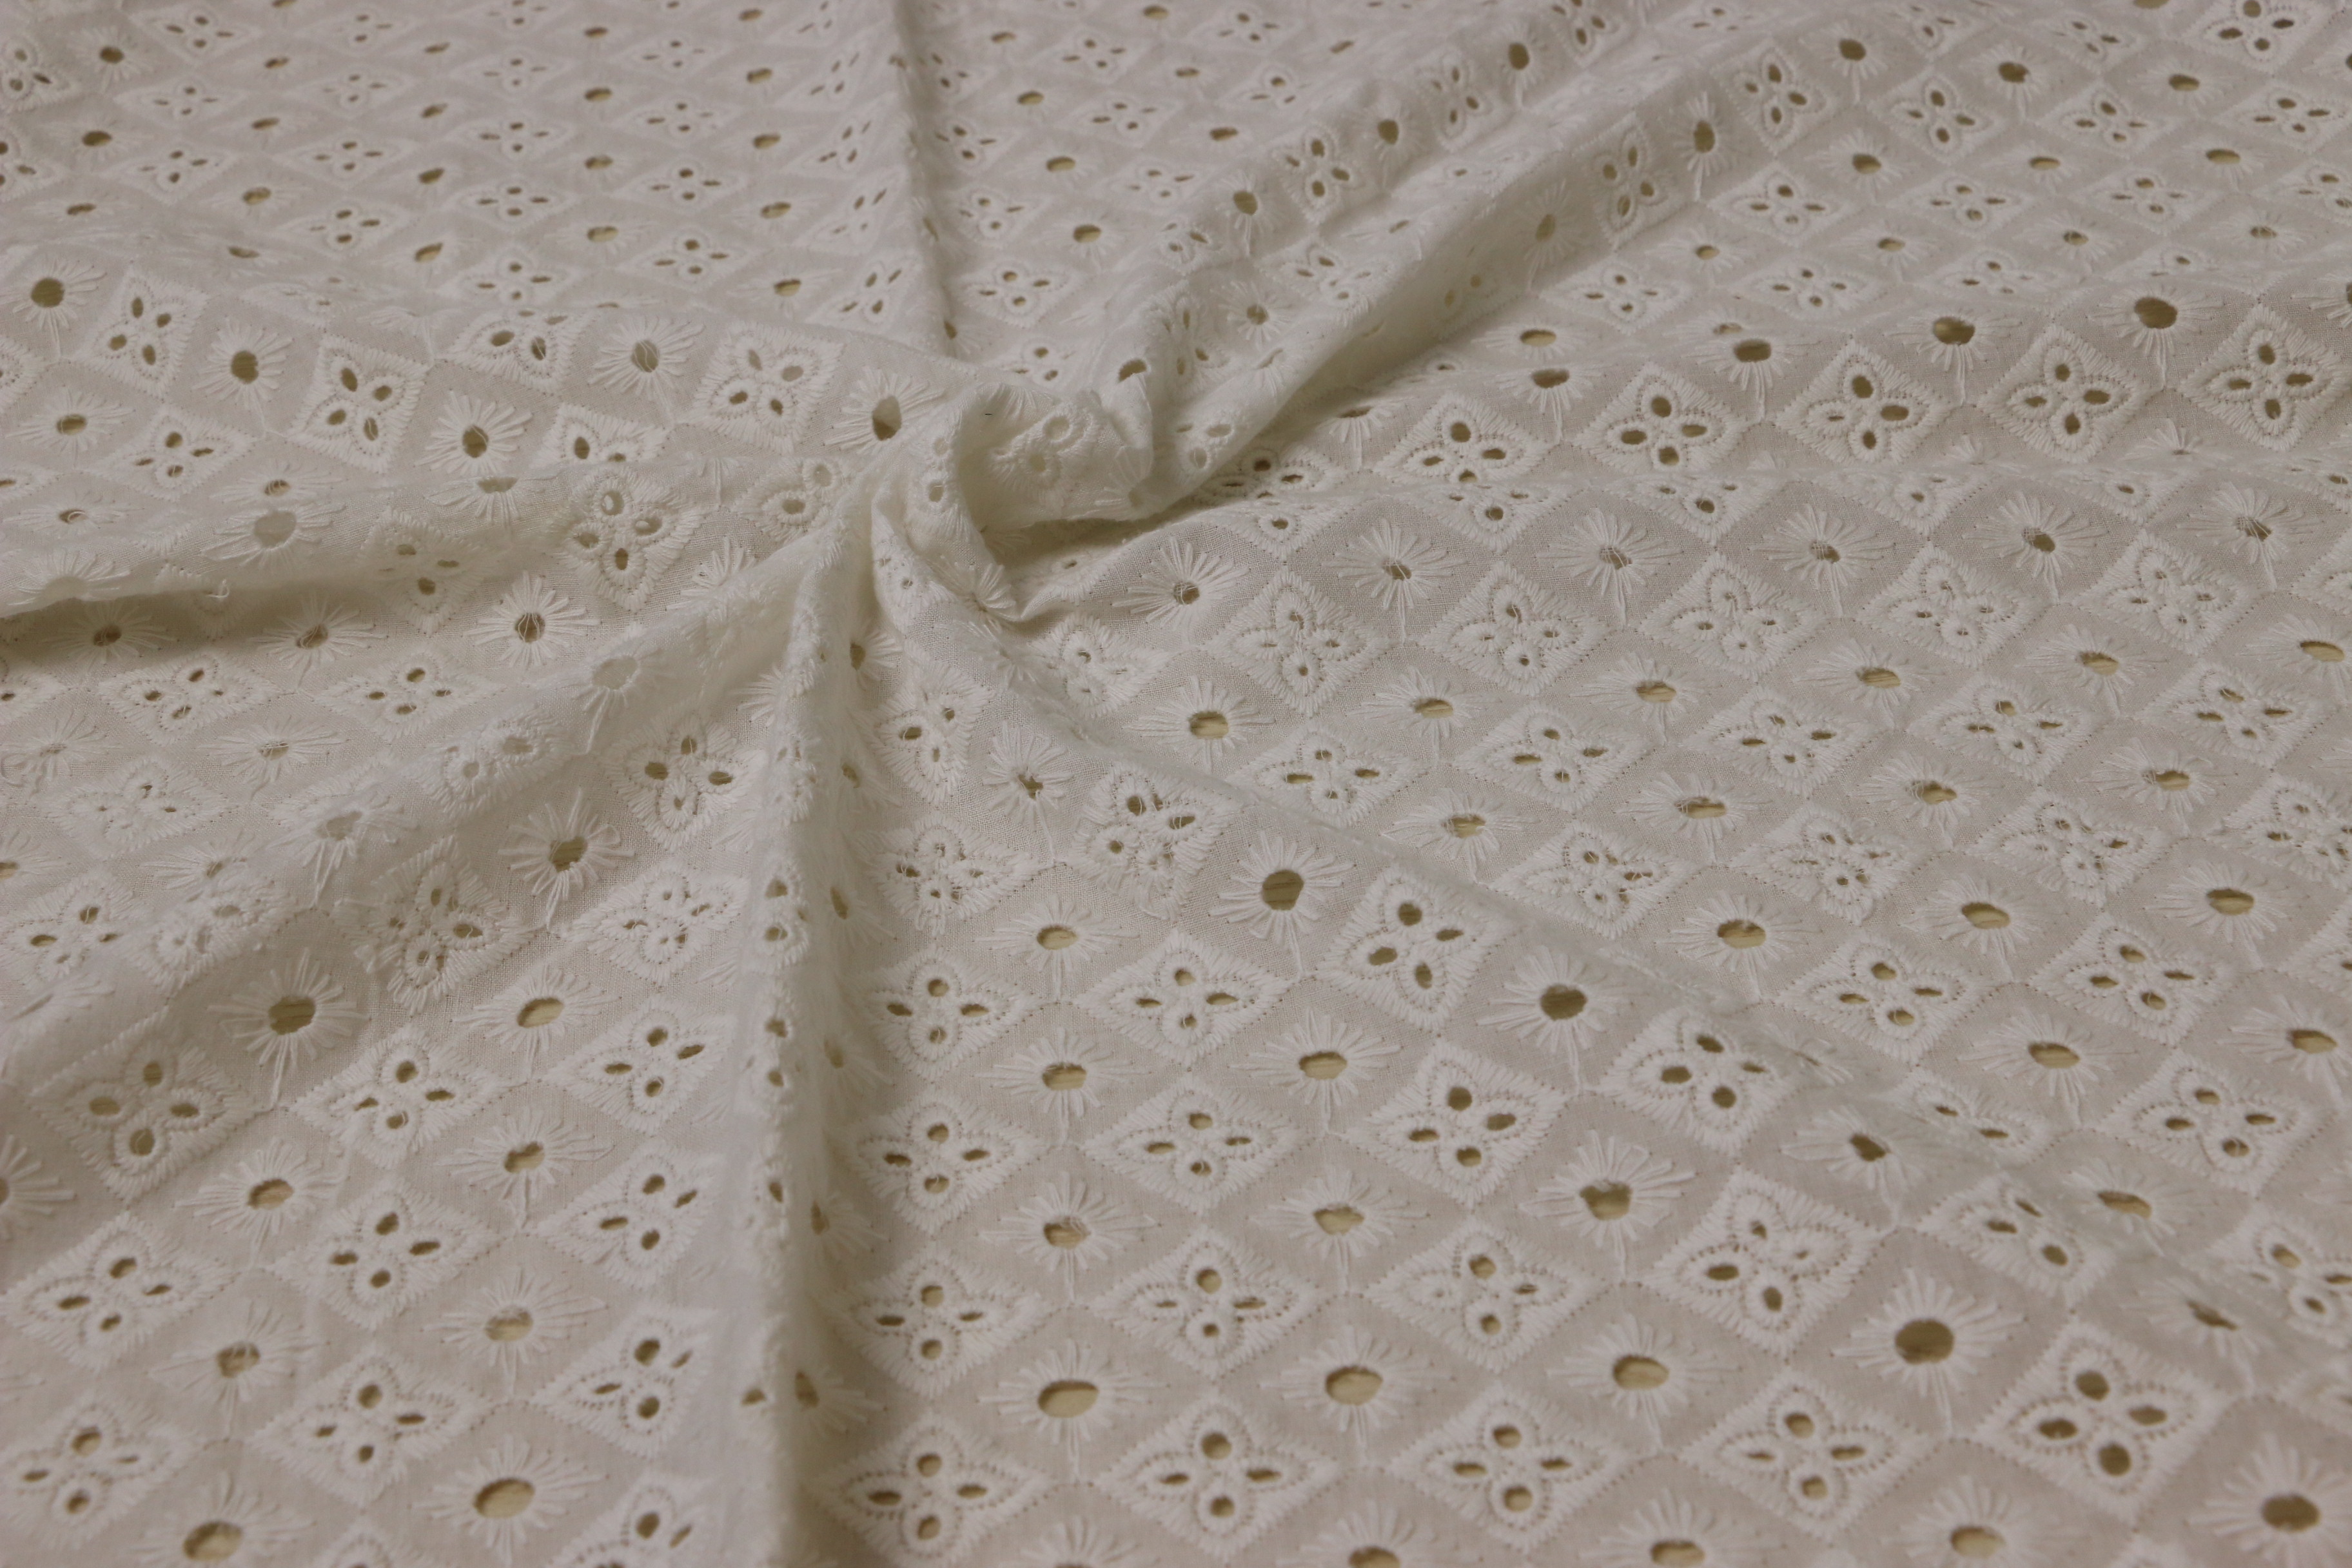  125cm Cotton Embroidered Lace Fabric , Translucent Lace Print Cotton Fabric Manufactures